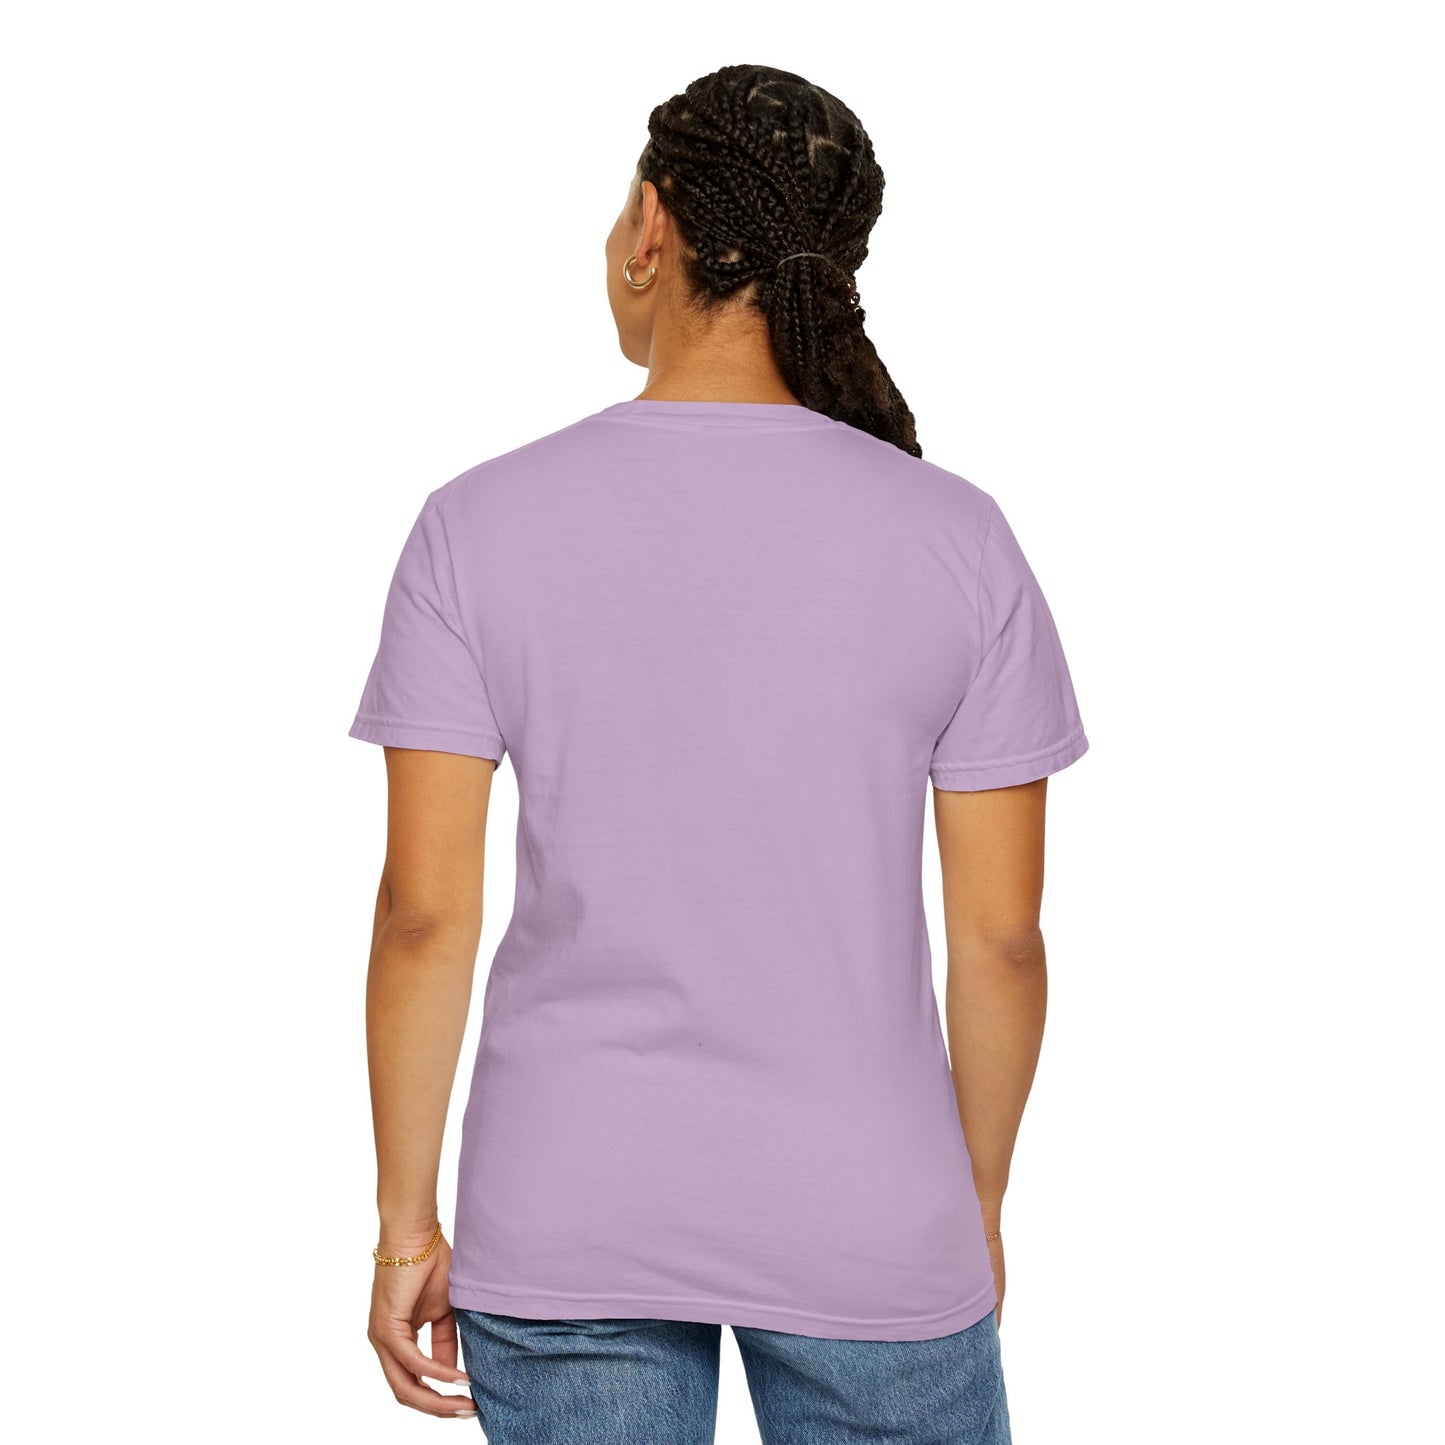 Father and daughter forever: Unisex Garment-Dyed T-shirt